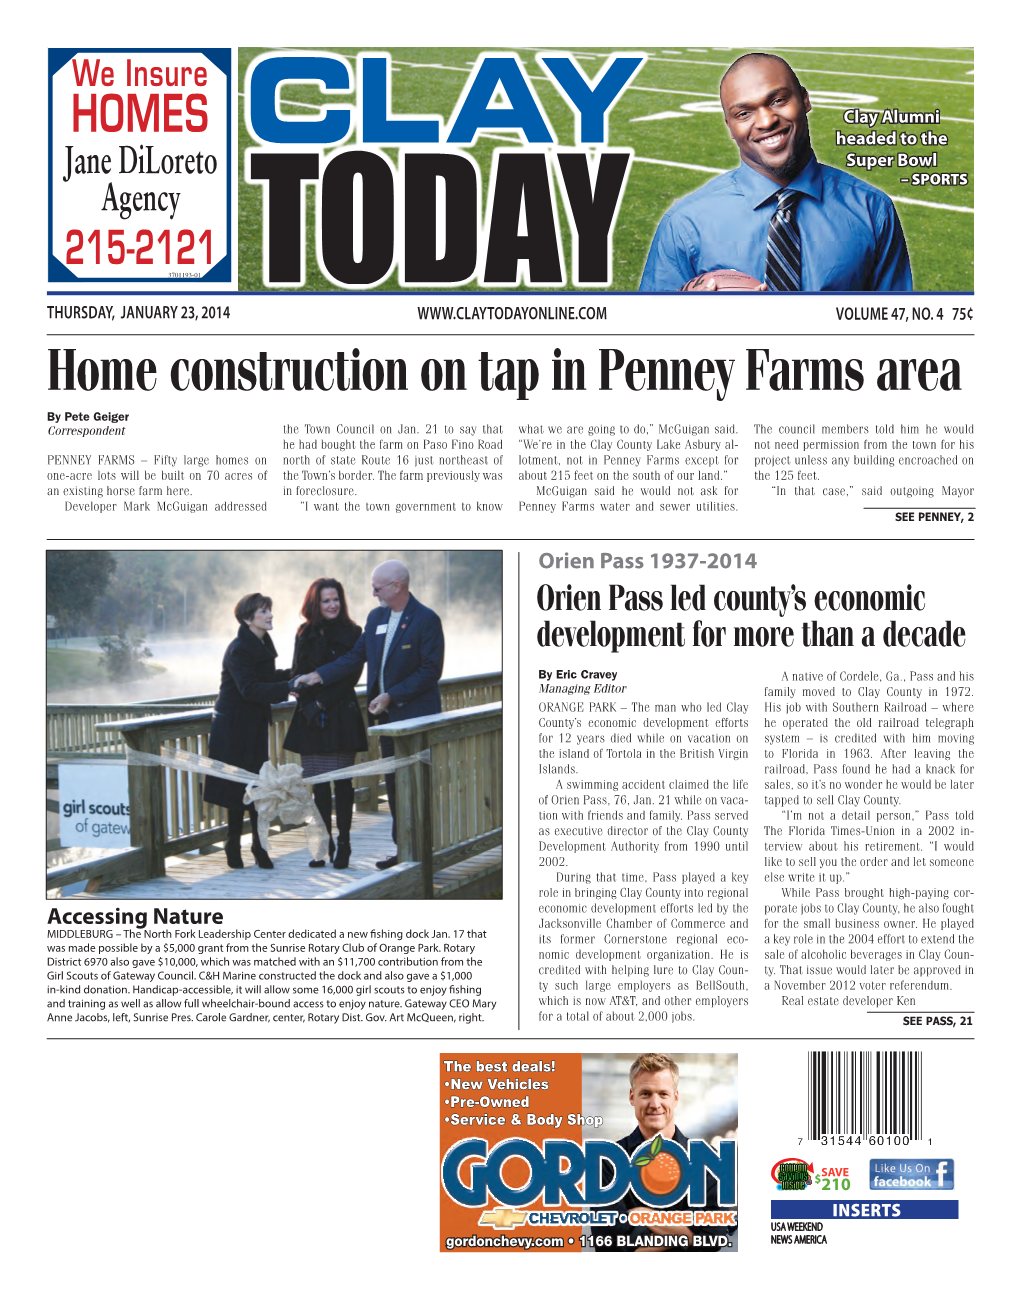 Home Construction on Tap in Penney Farms Area by Pete Geiger Correspondent the Town Council on Jan